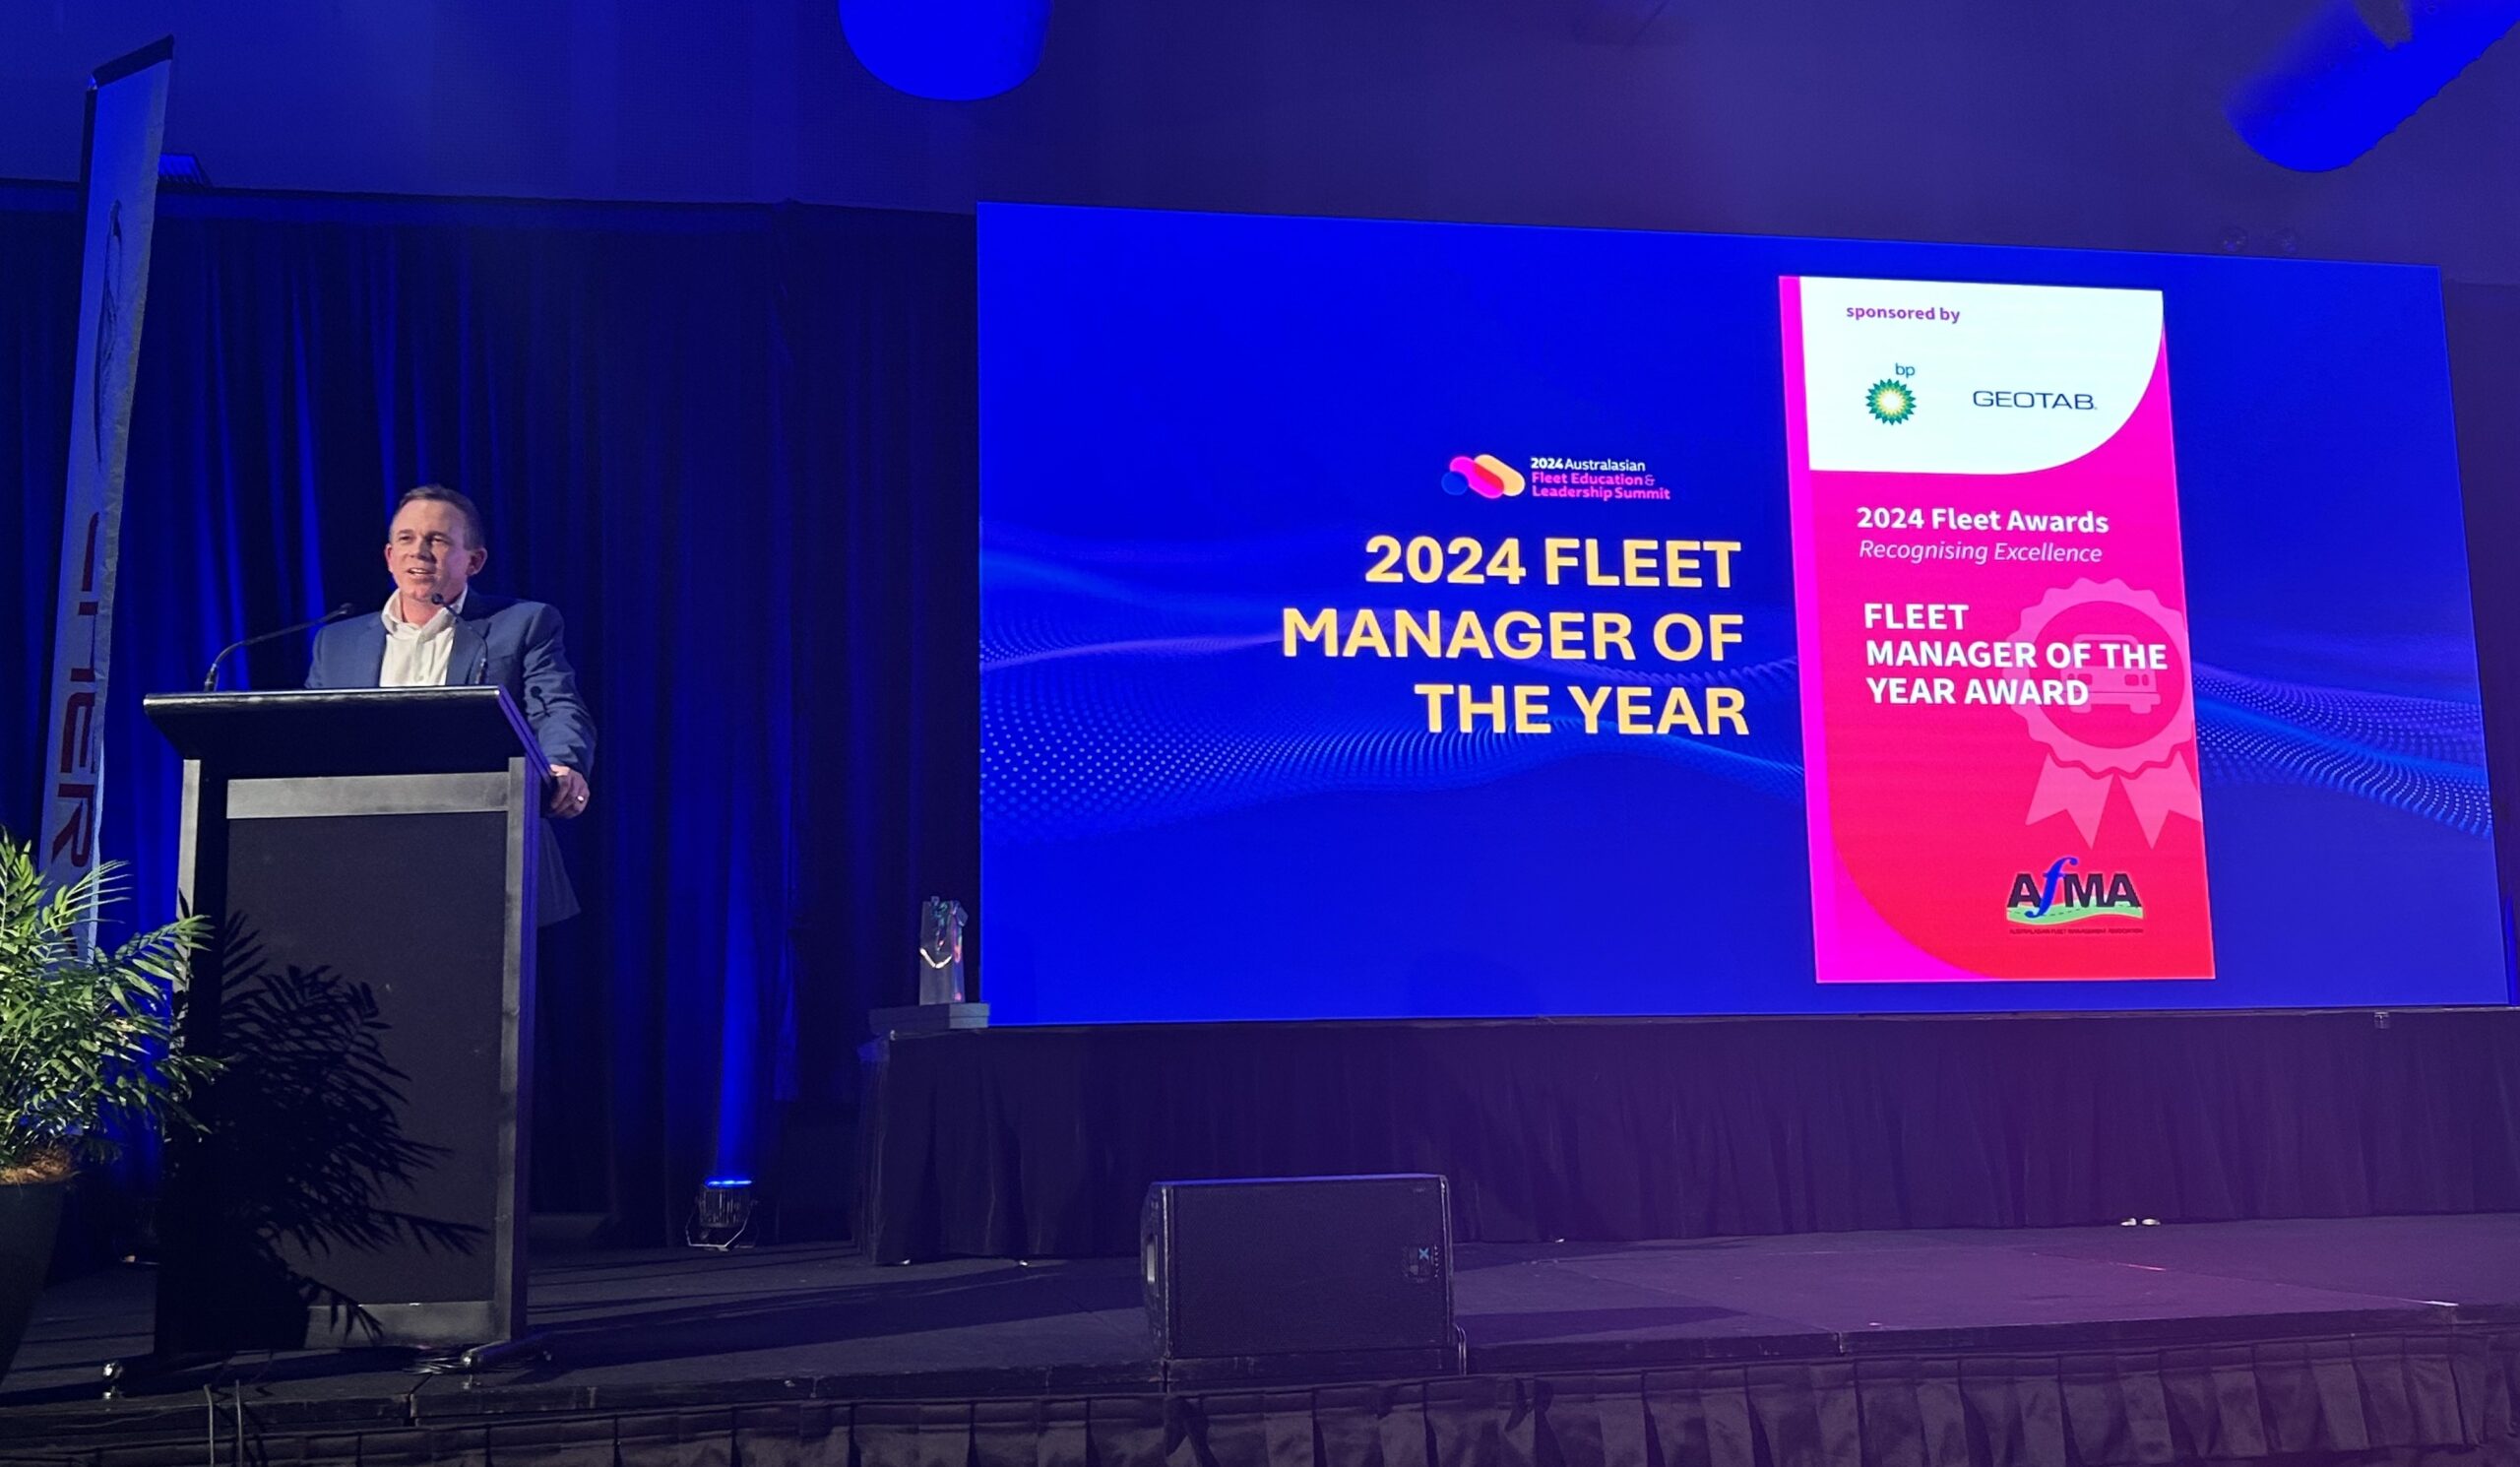 Thomas Brayley Awarded the 2024 Fleet Manager of the Year